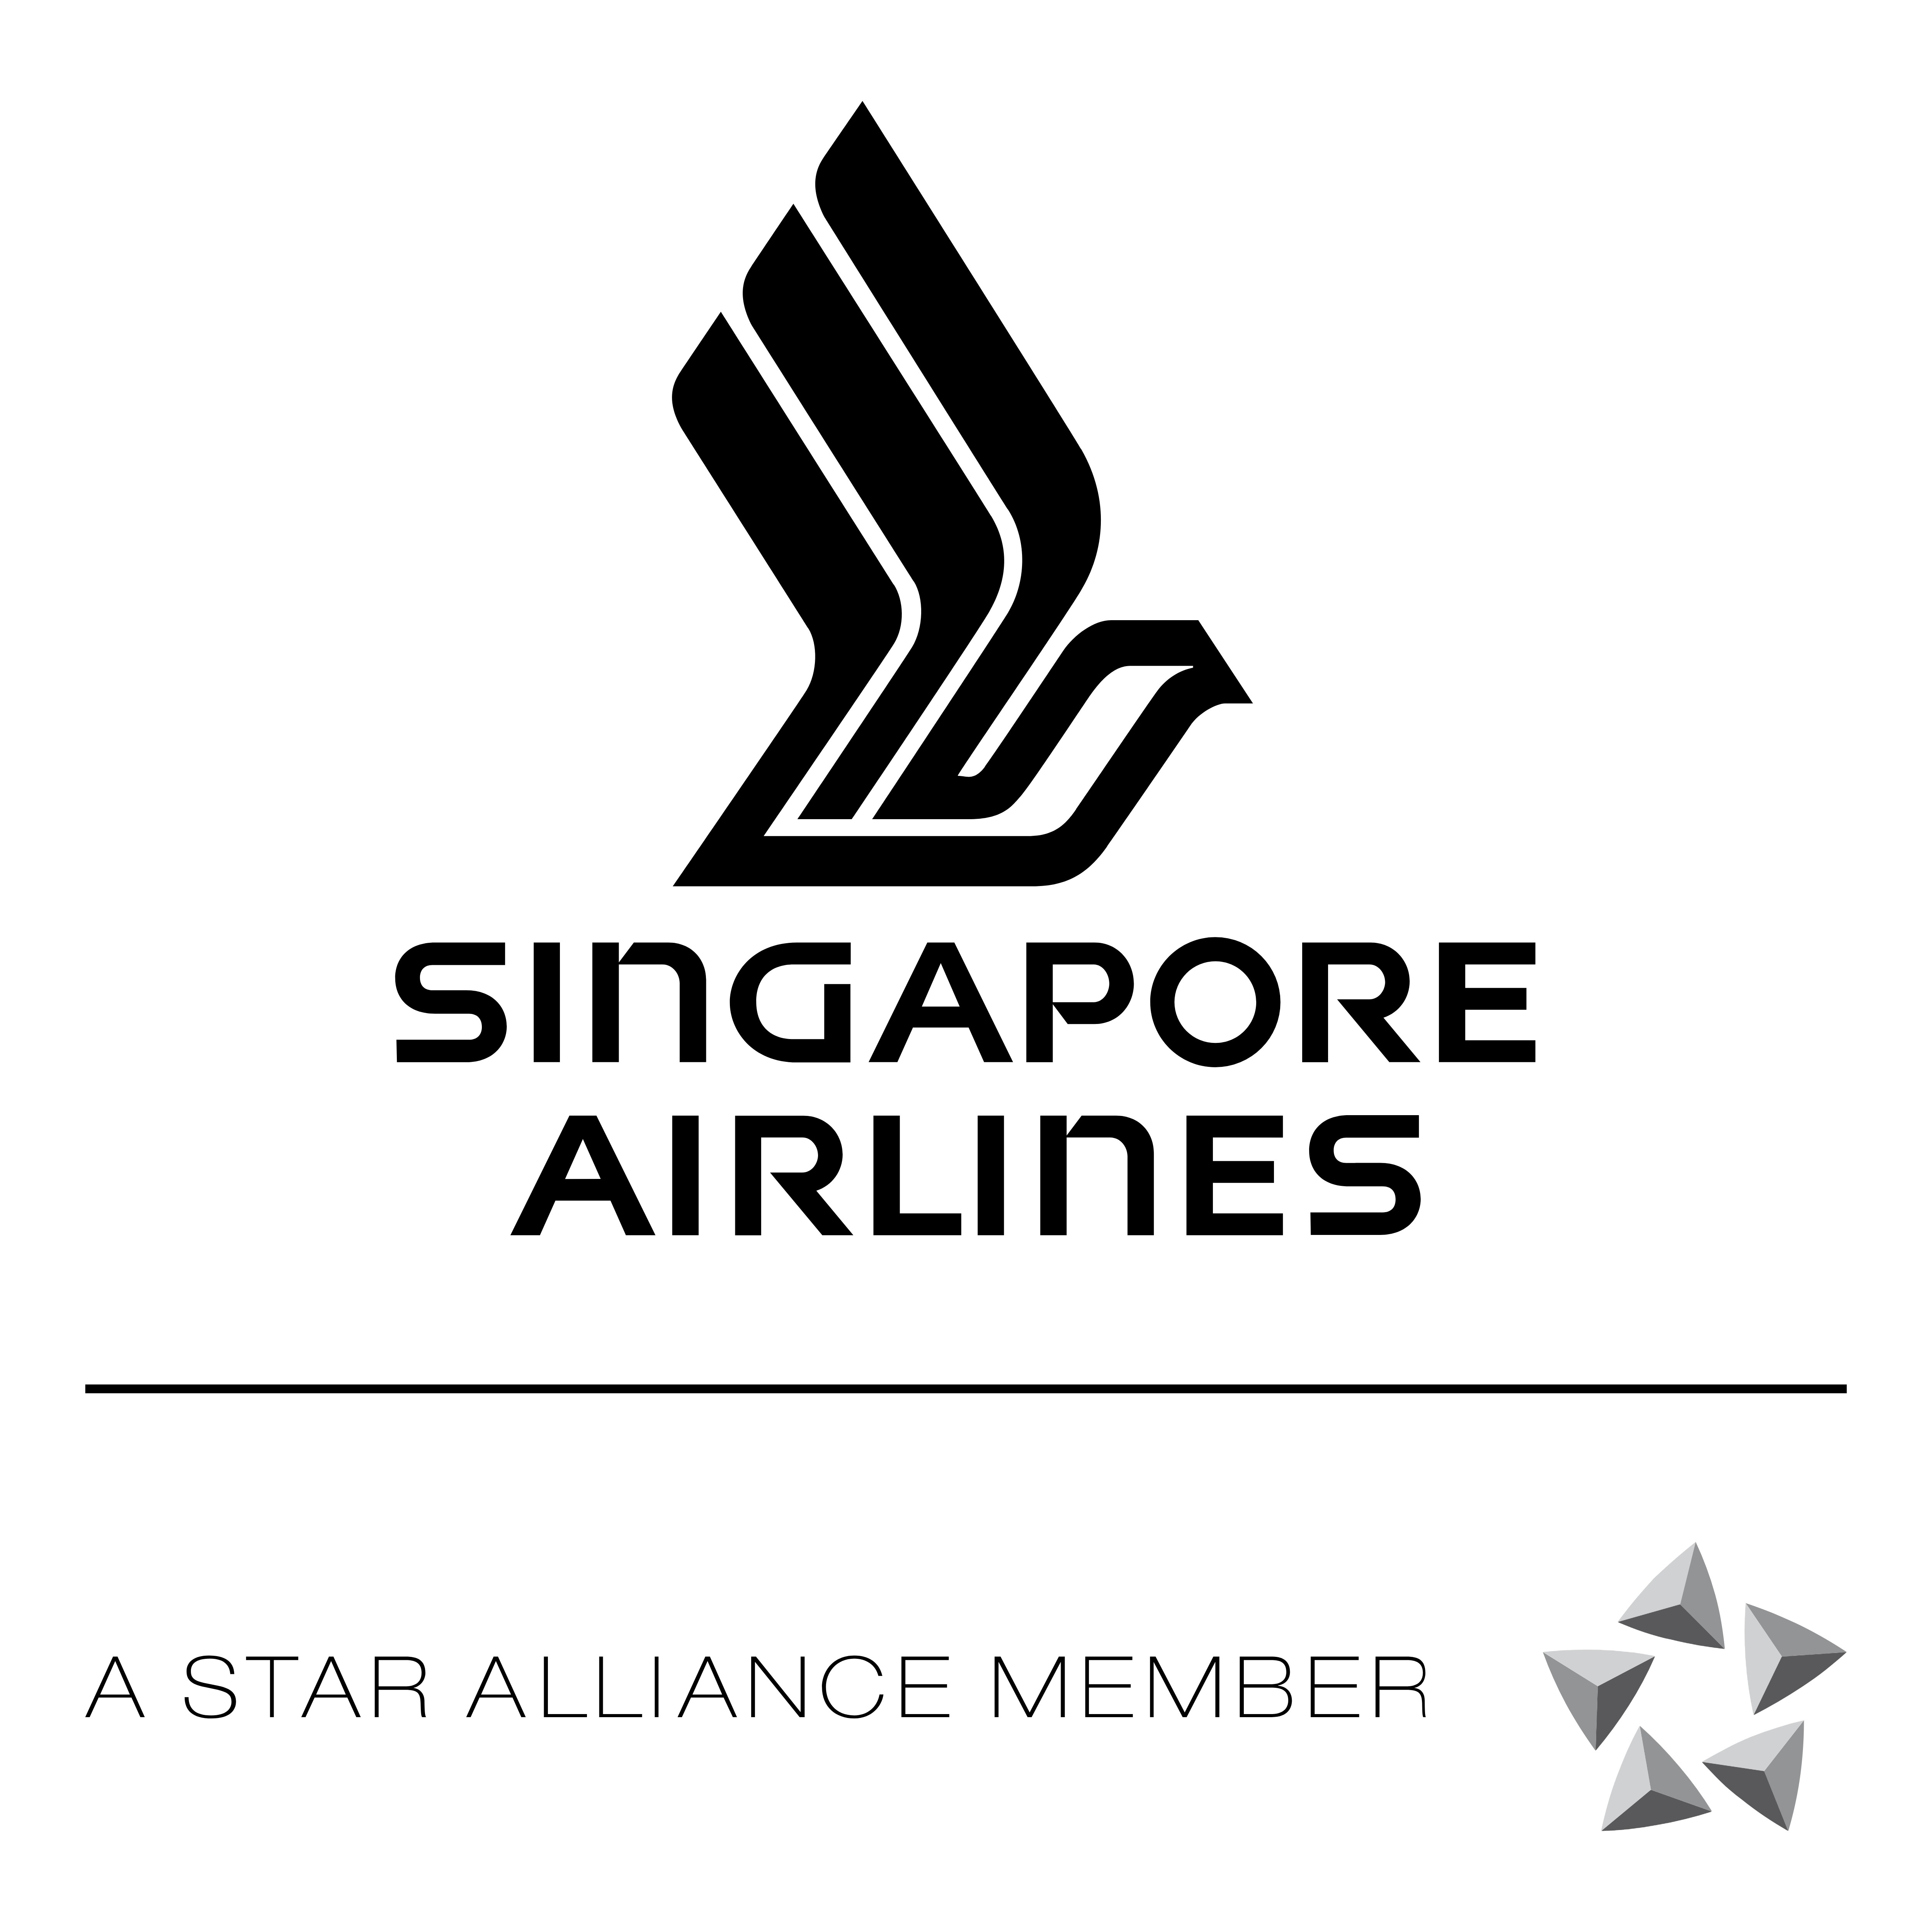 Black Airline Logo - Singapore Airlines – Logos Download